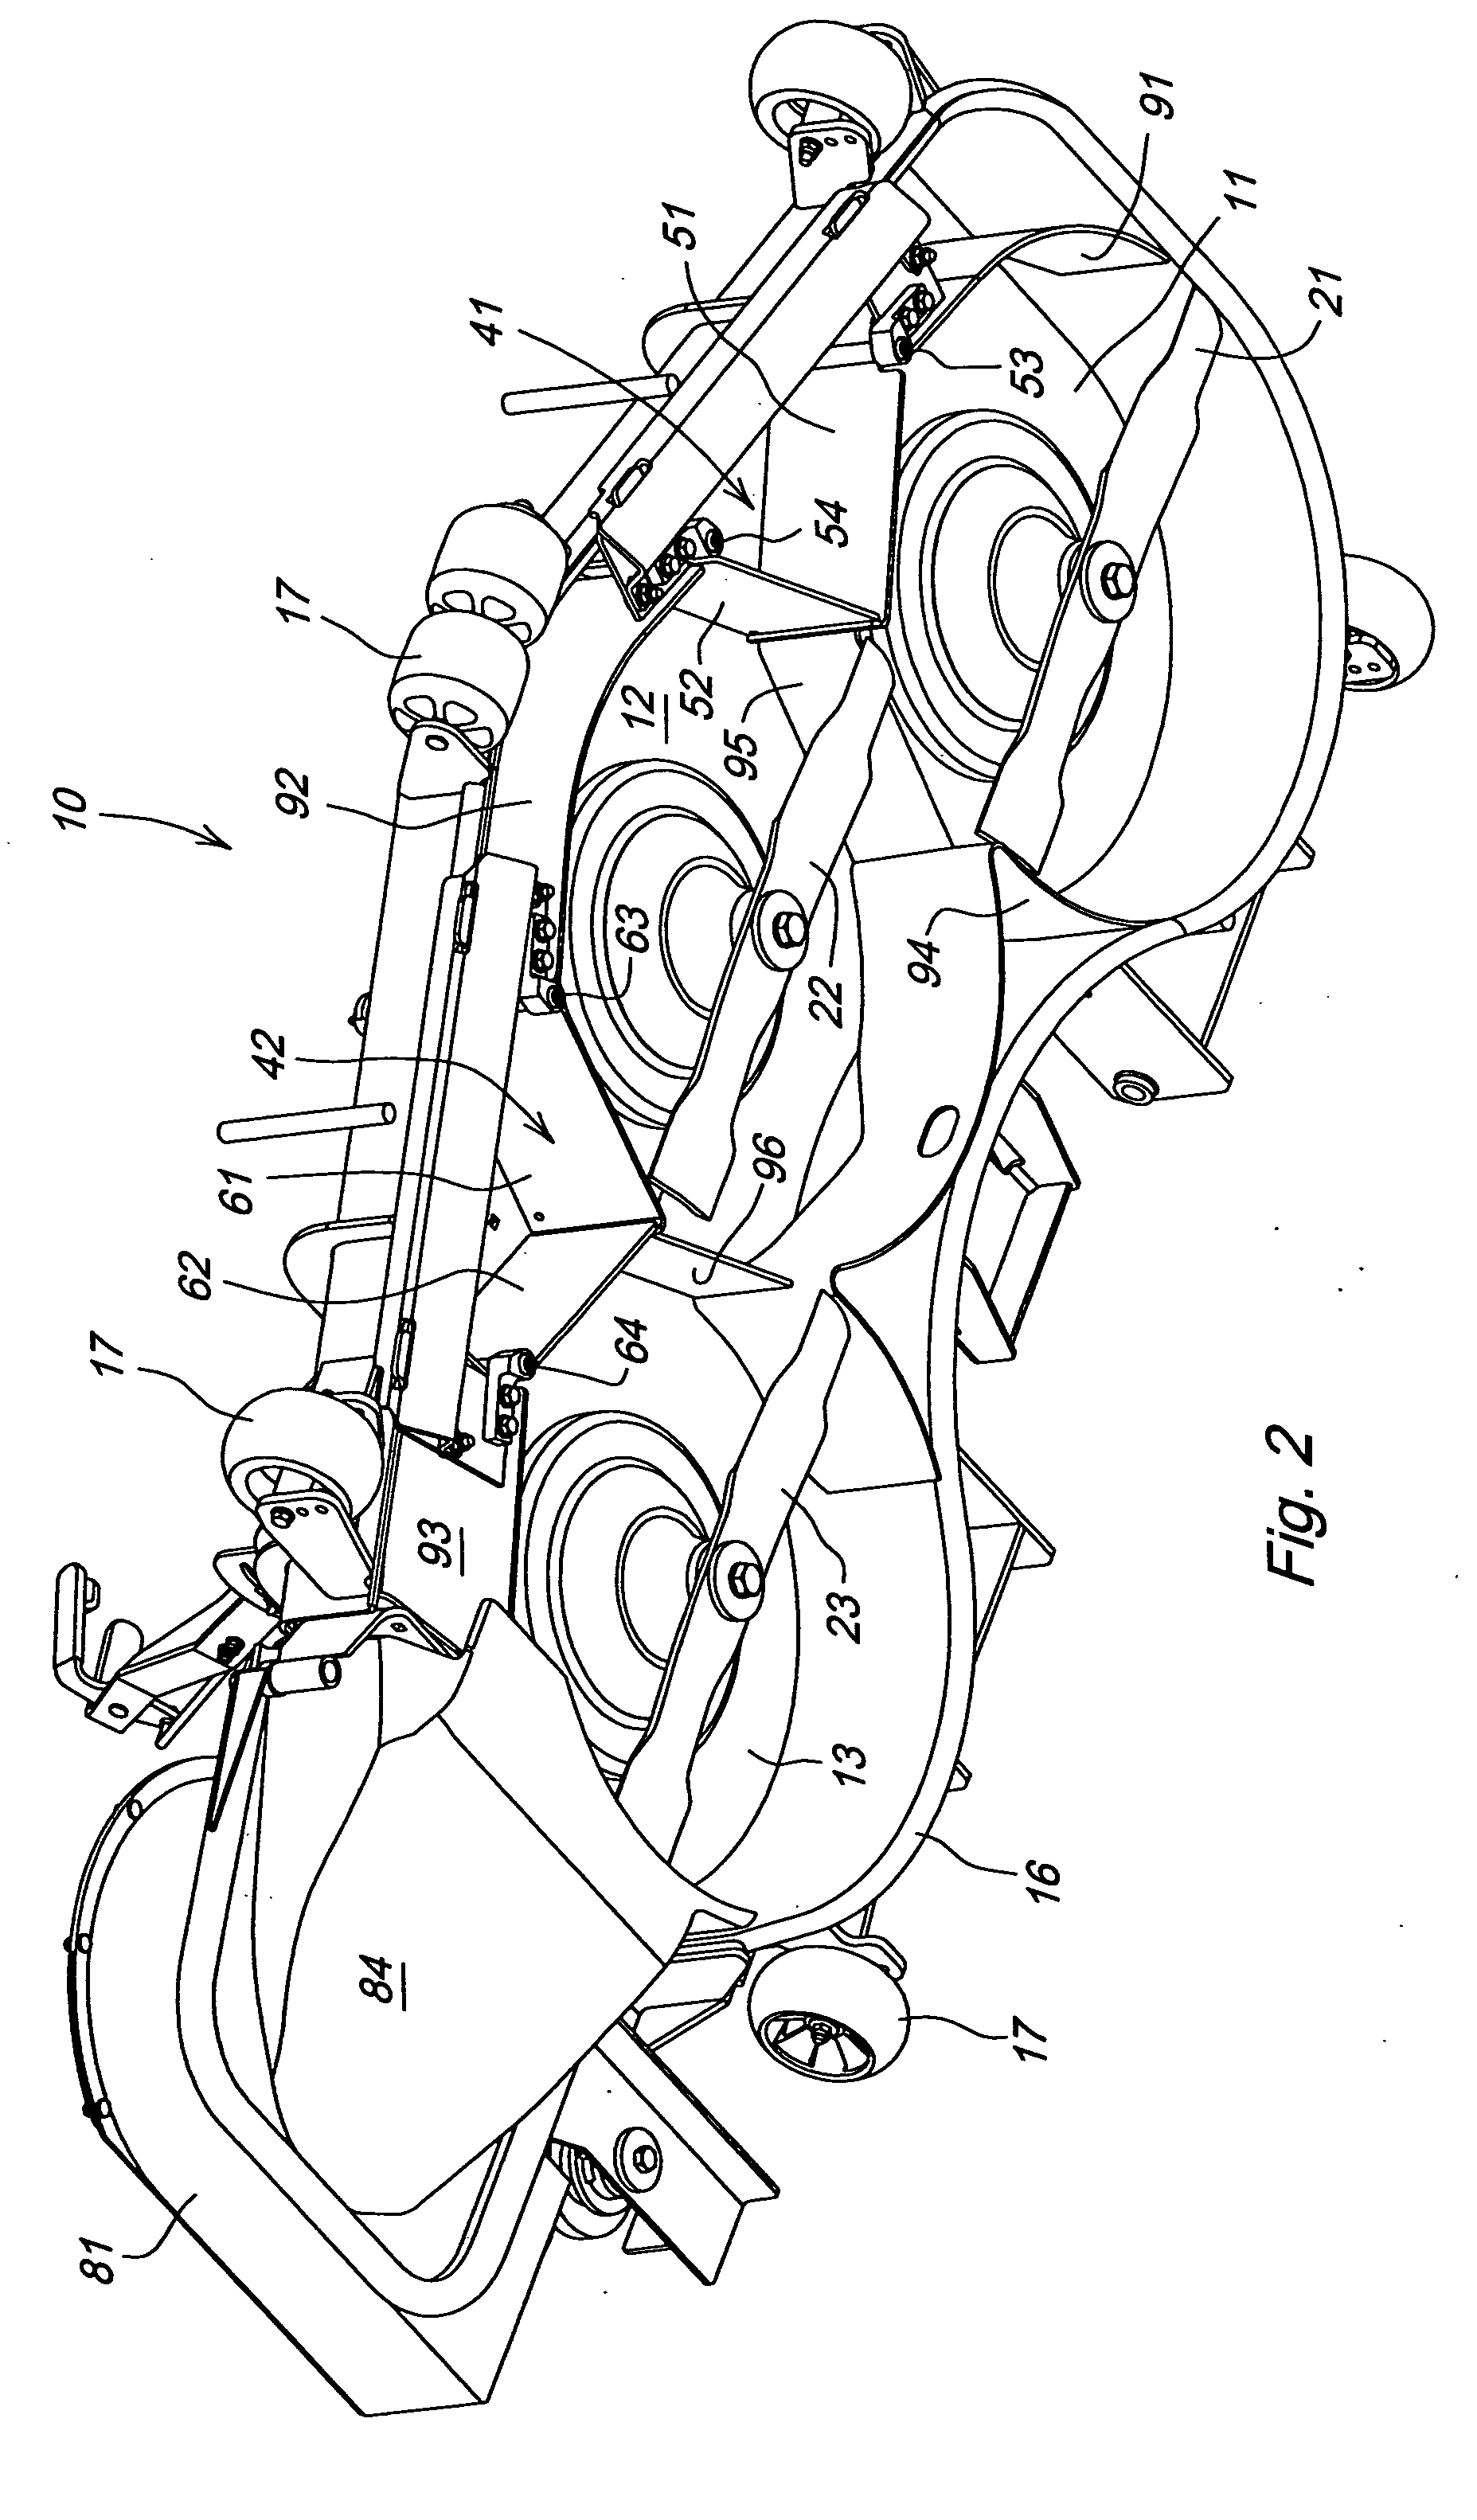 Mower deck with multiple modes of operation